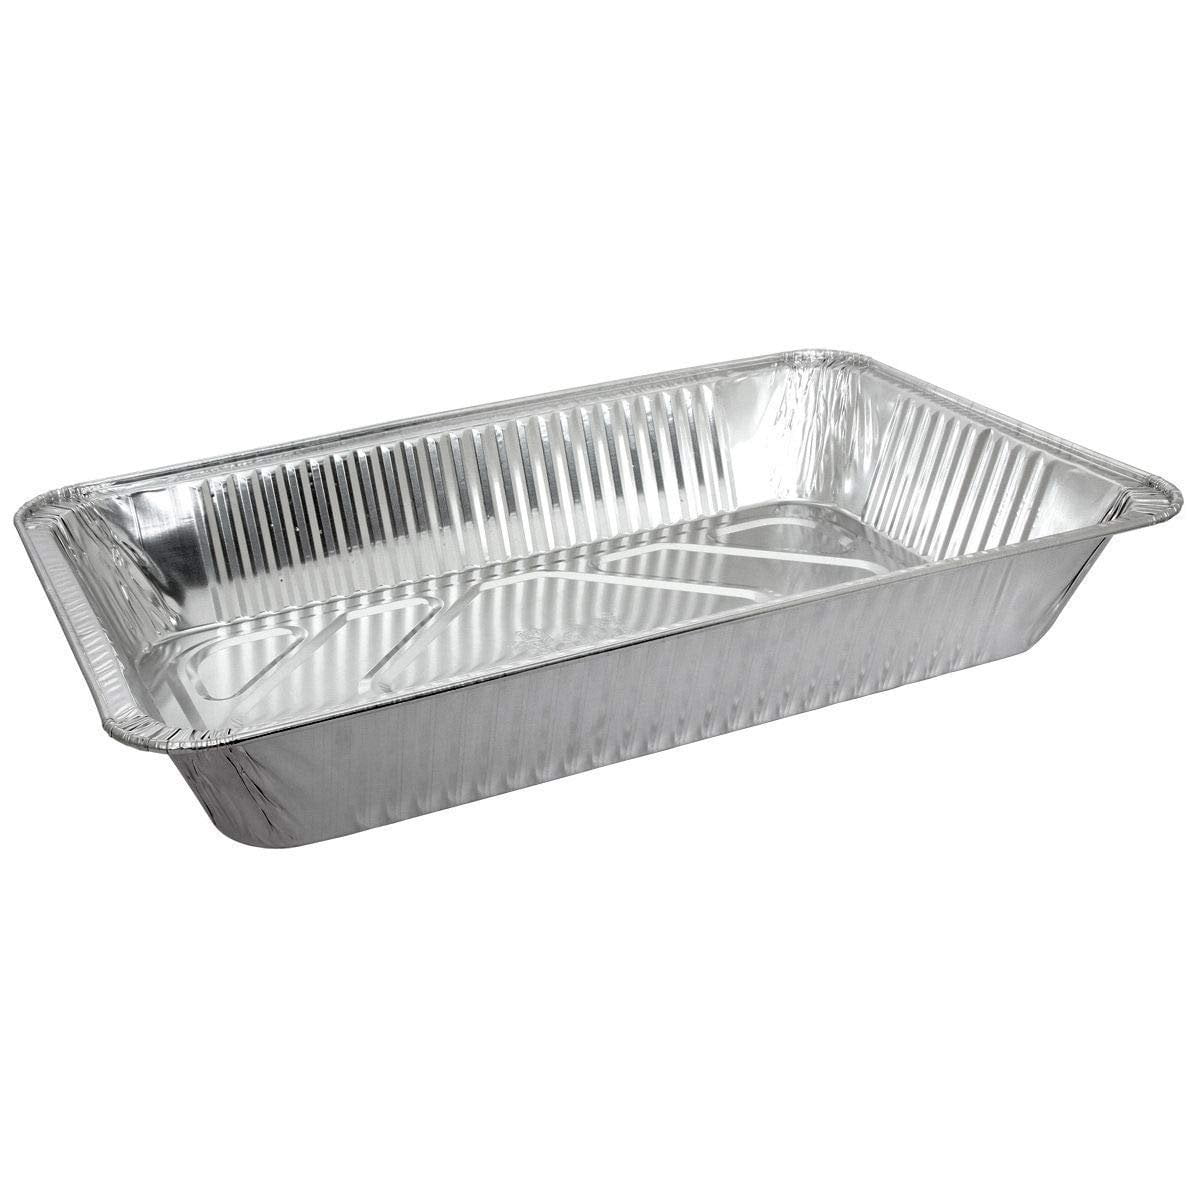 Reynolds Kitchens Heavy Duty Disposable Aluminum Roasting Pans with Li